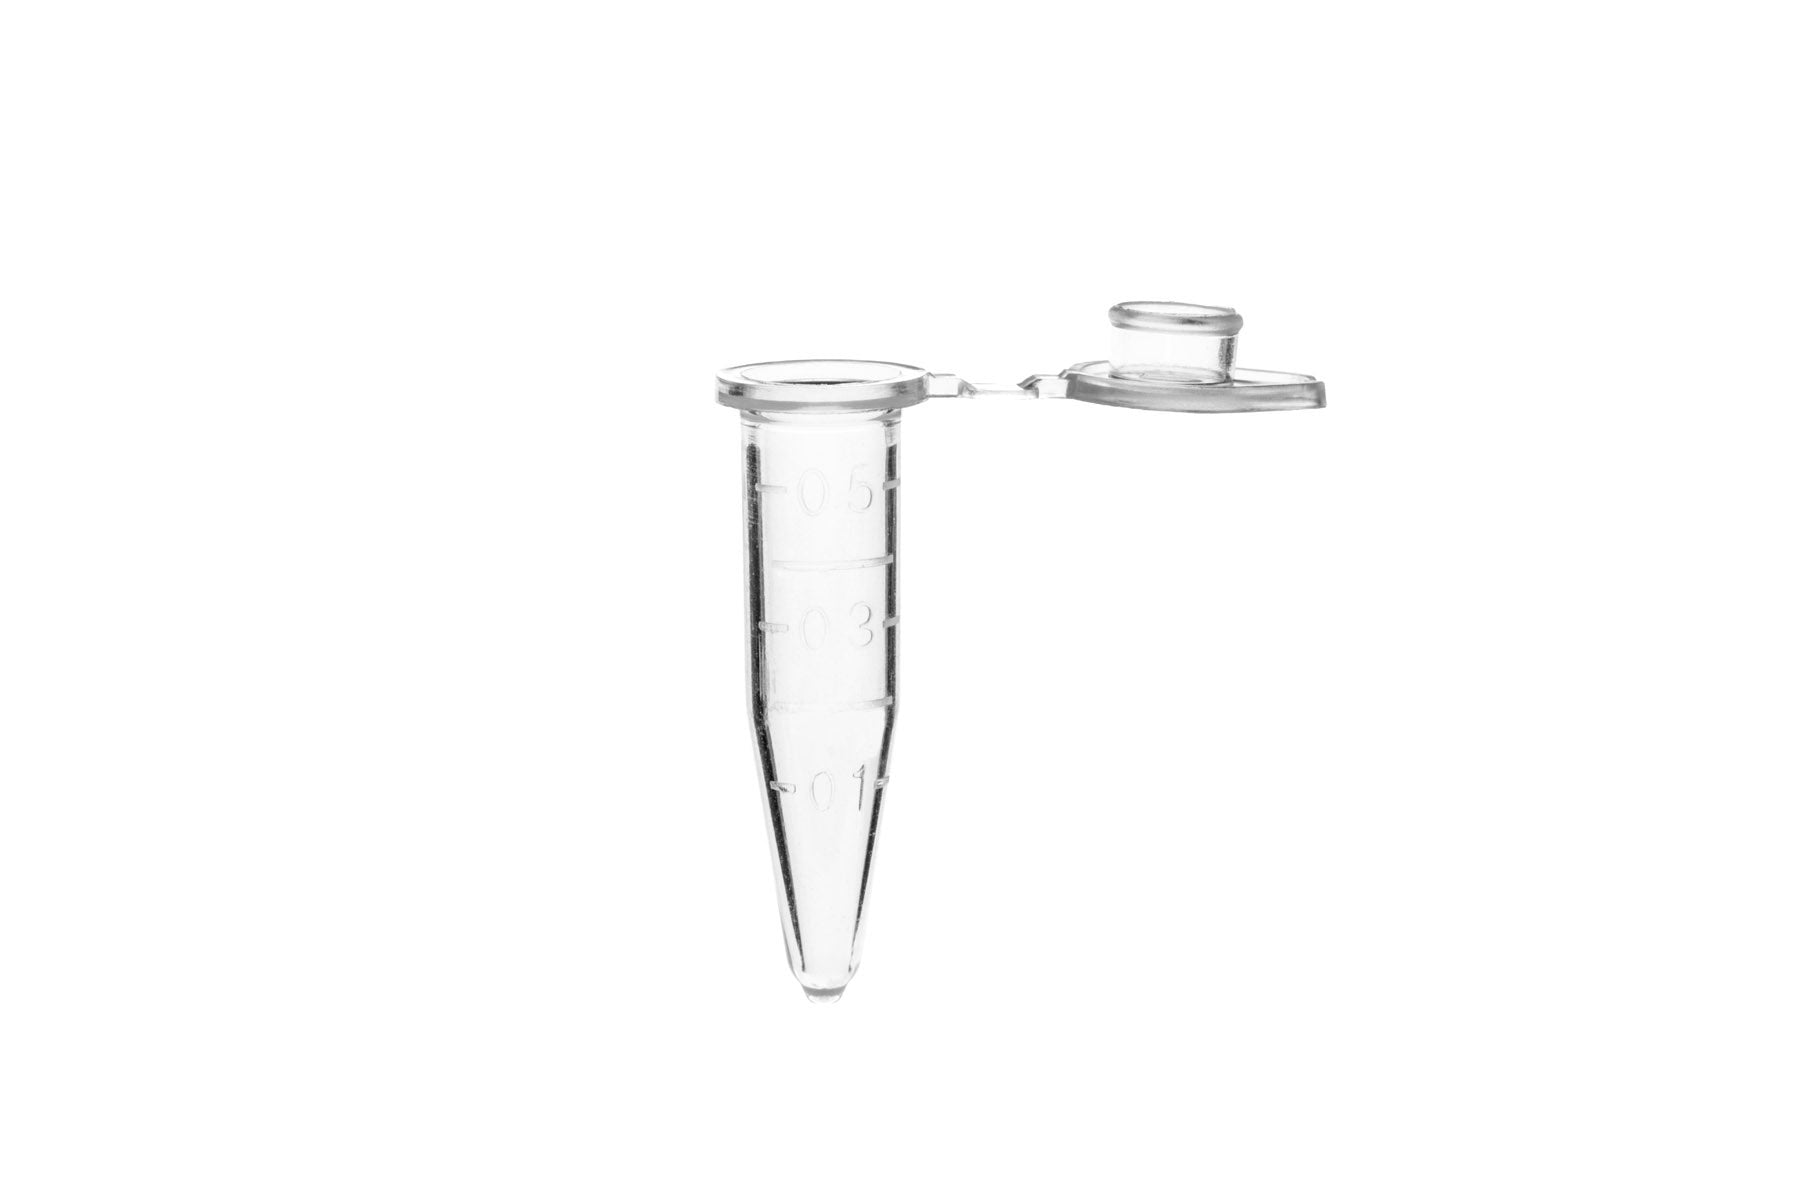 MTC Bio C2007, SureSeal Microcentrifuge Tube with Cap, 0.5ml, Clear, Sterile, with Self-Standing Bag, 500/pk